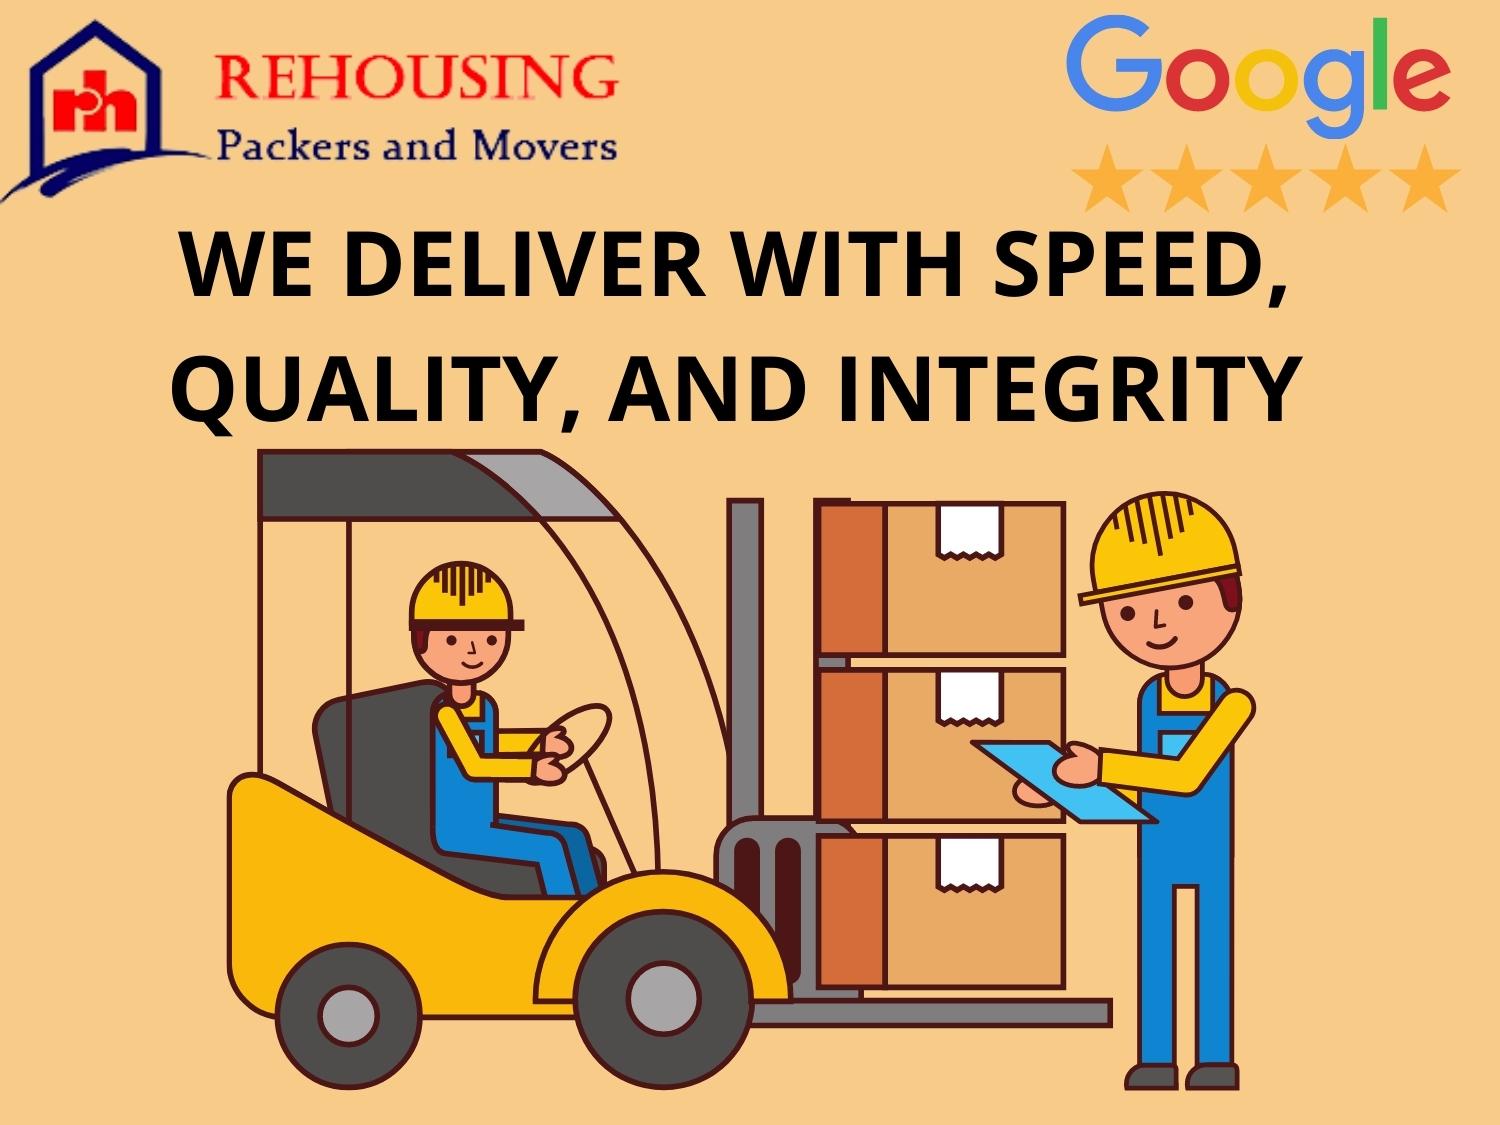 Courier services from Surat to Thiruvananthapuram is dependable and secure, but they do not meet your desire for immediate delivery